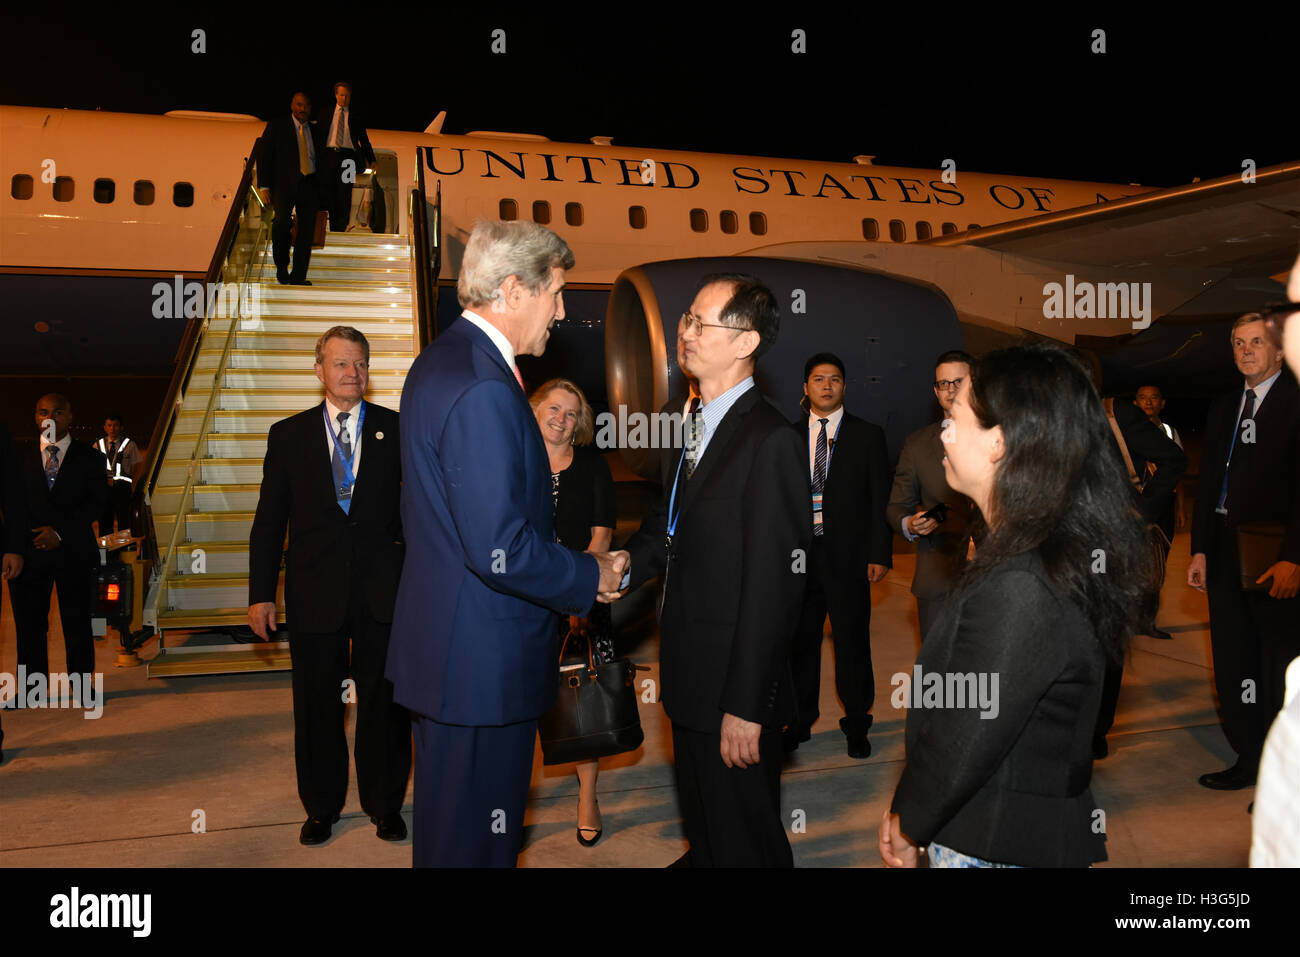 U.S. Secretary of State John Kerry shakes hands with Shi Yuanqiang, Counselor of Chinese Ministry of Foreign Affairs after arriving in Hangzhou, China on September 3, 2016. Secretary Kerry will follow President Obama's schedule and events surrounding the G20 Summit. Stock Photo